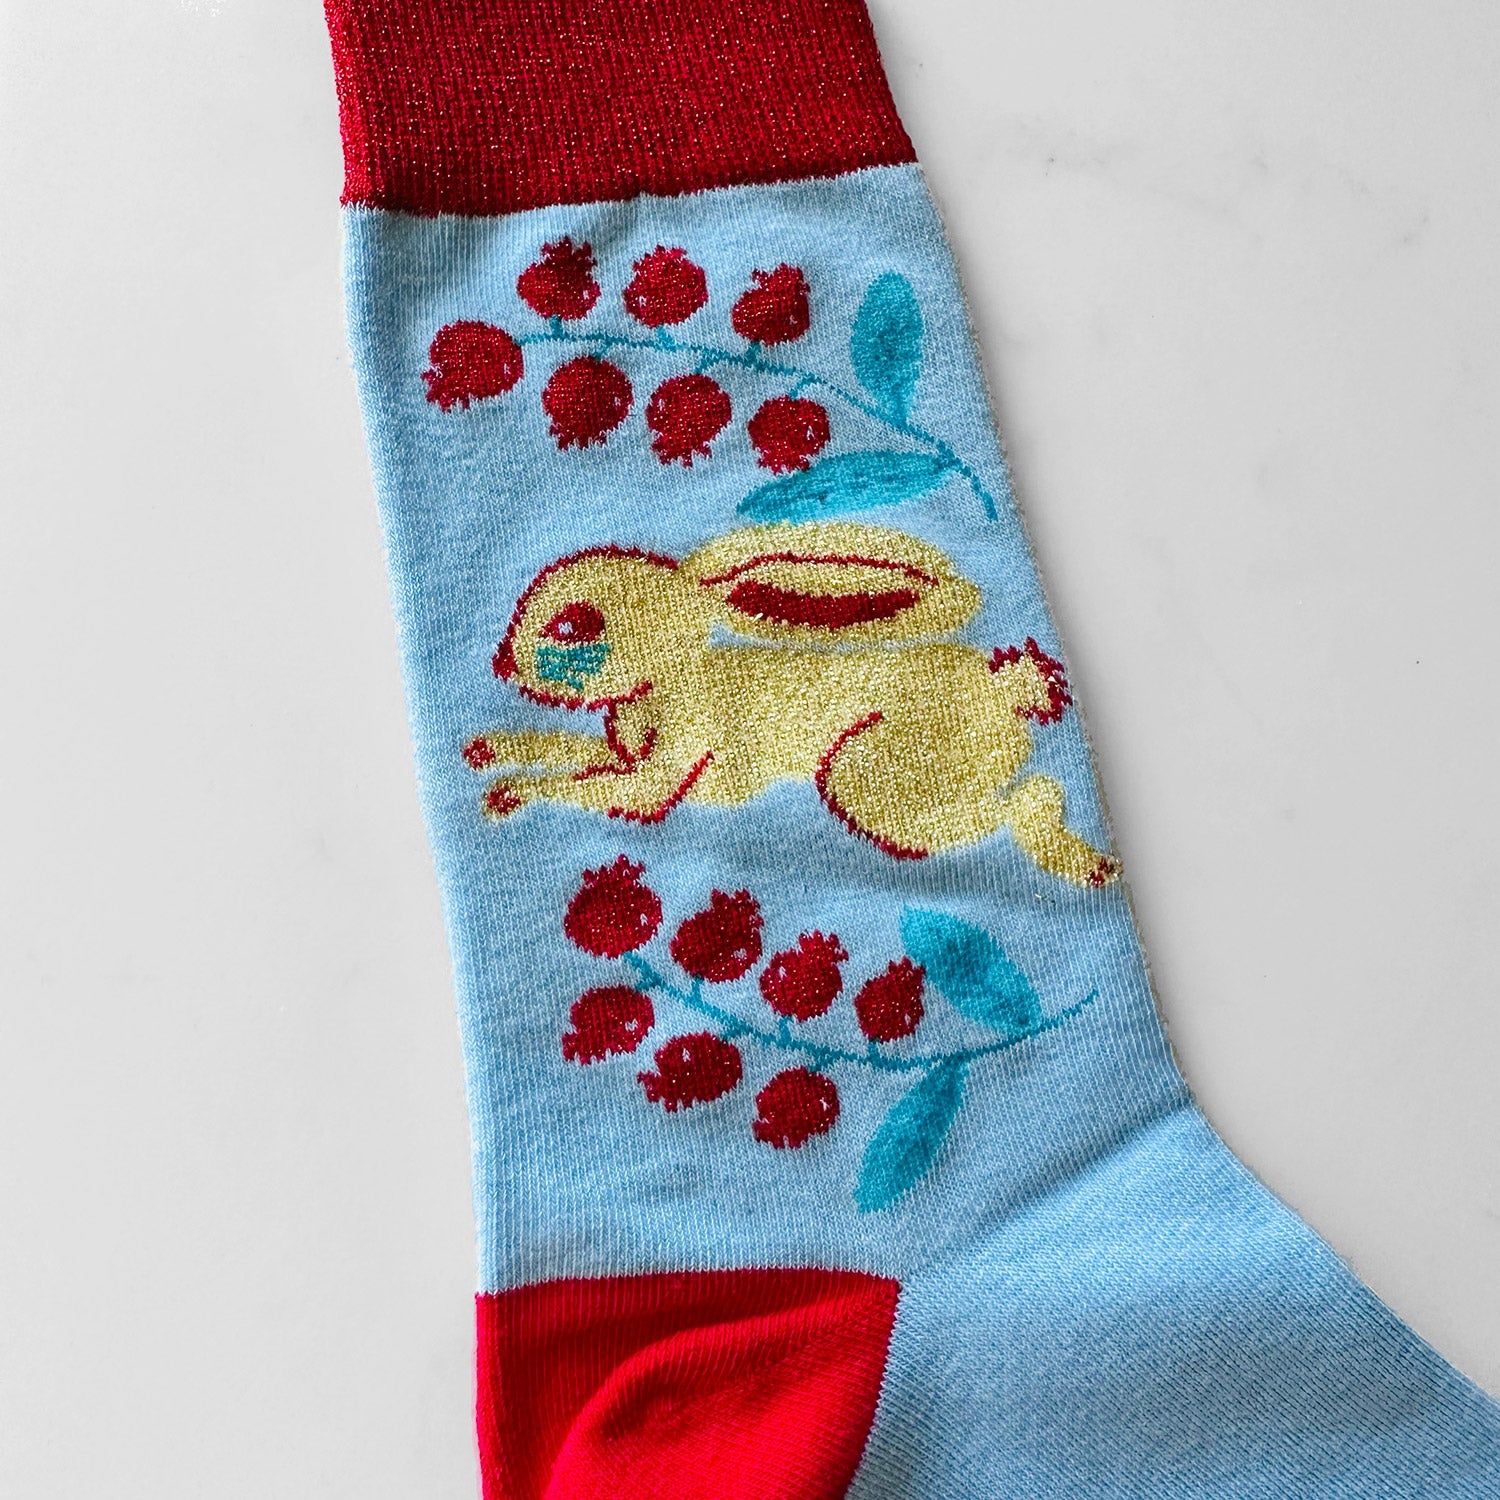 Blue and red sock with rabbit on it.